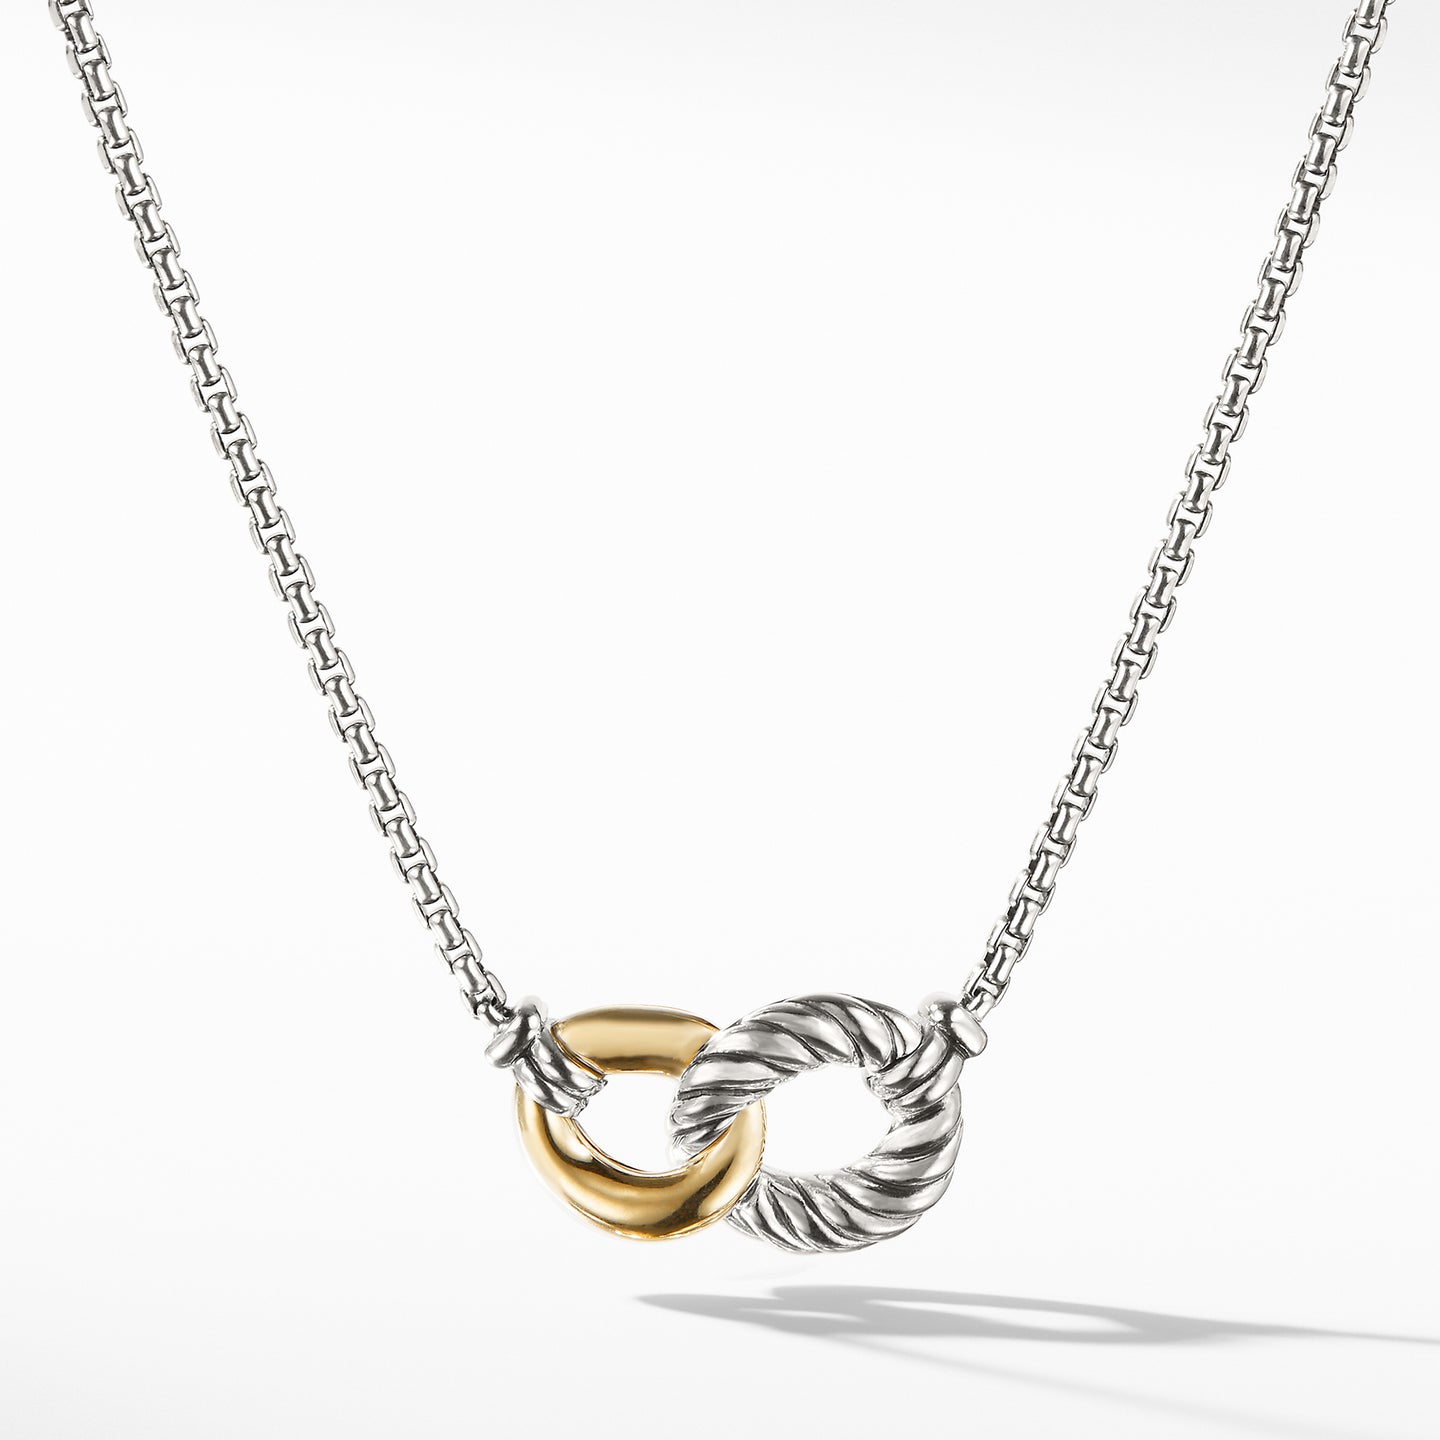 David Yurman Sterling Silver with 18k Yellow Gold Necklace